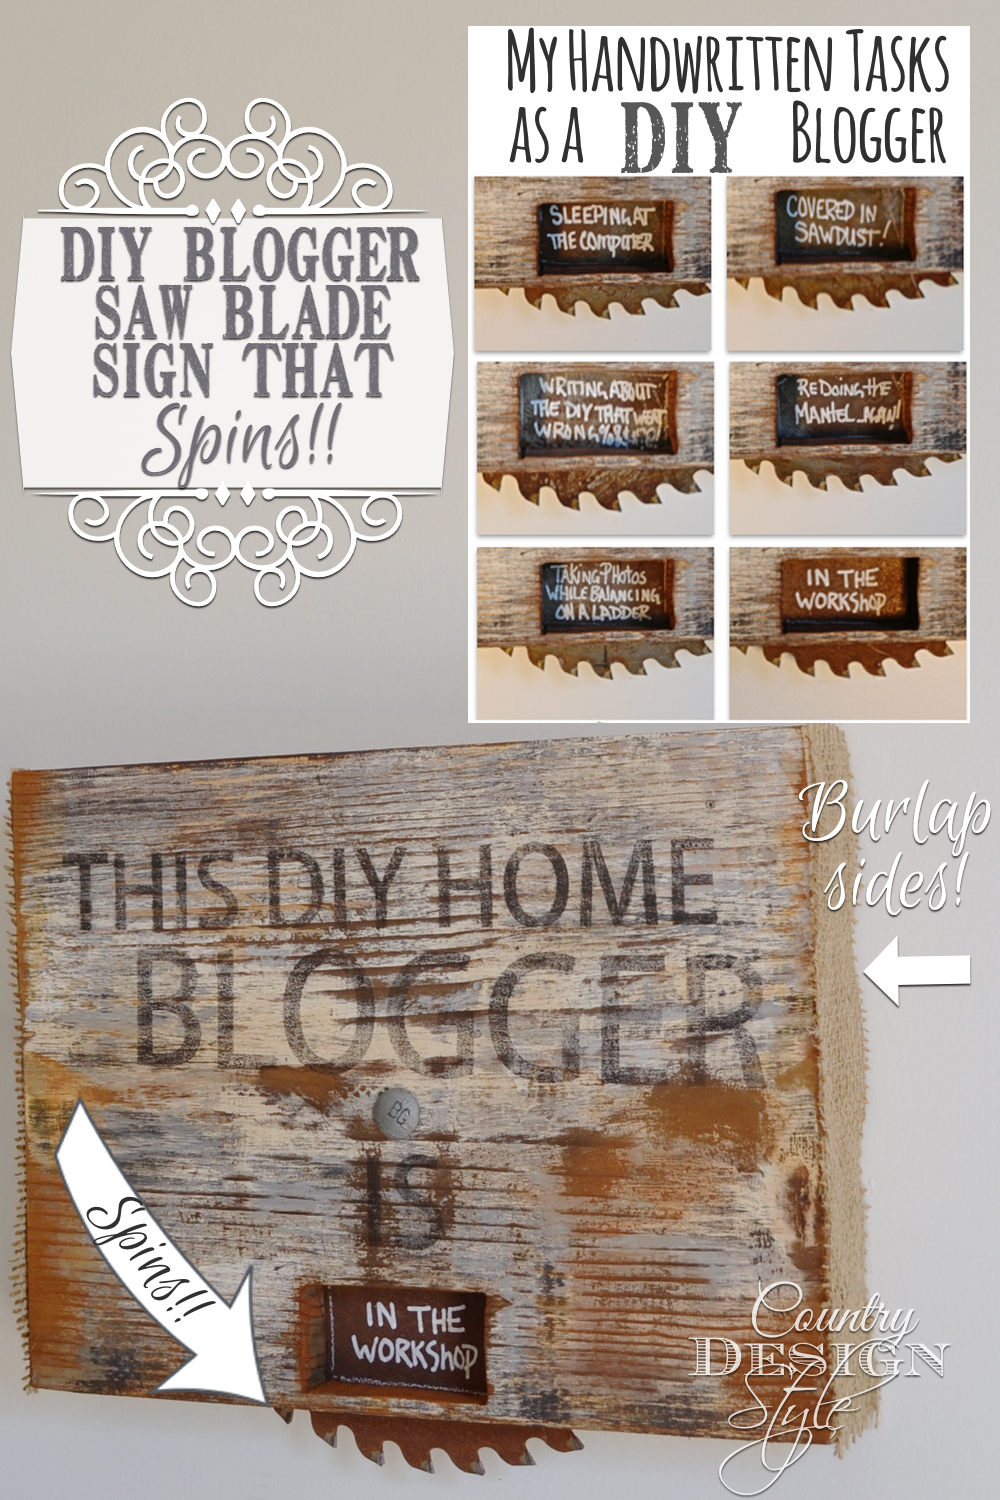 DIY blogger sign made from scrap wood and rusty junky saw blade. Plus is spins! Revealing tasks in the window. Burlap covers the edges. Country Design Style